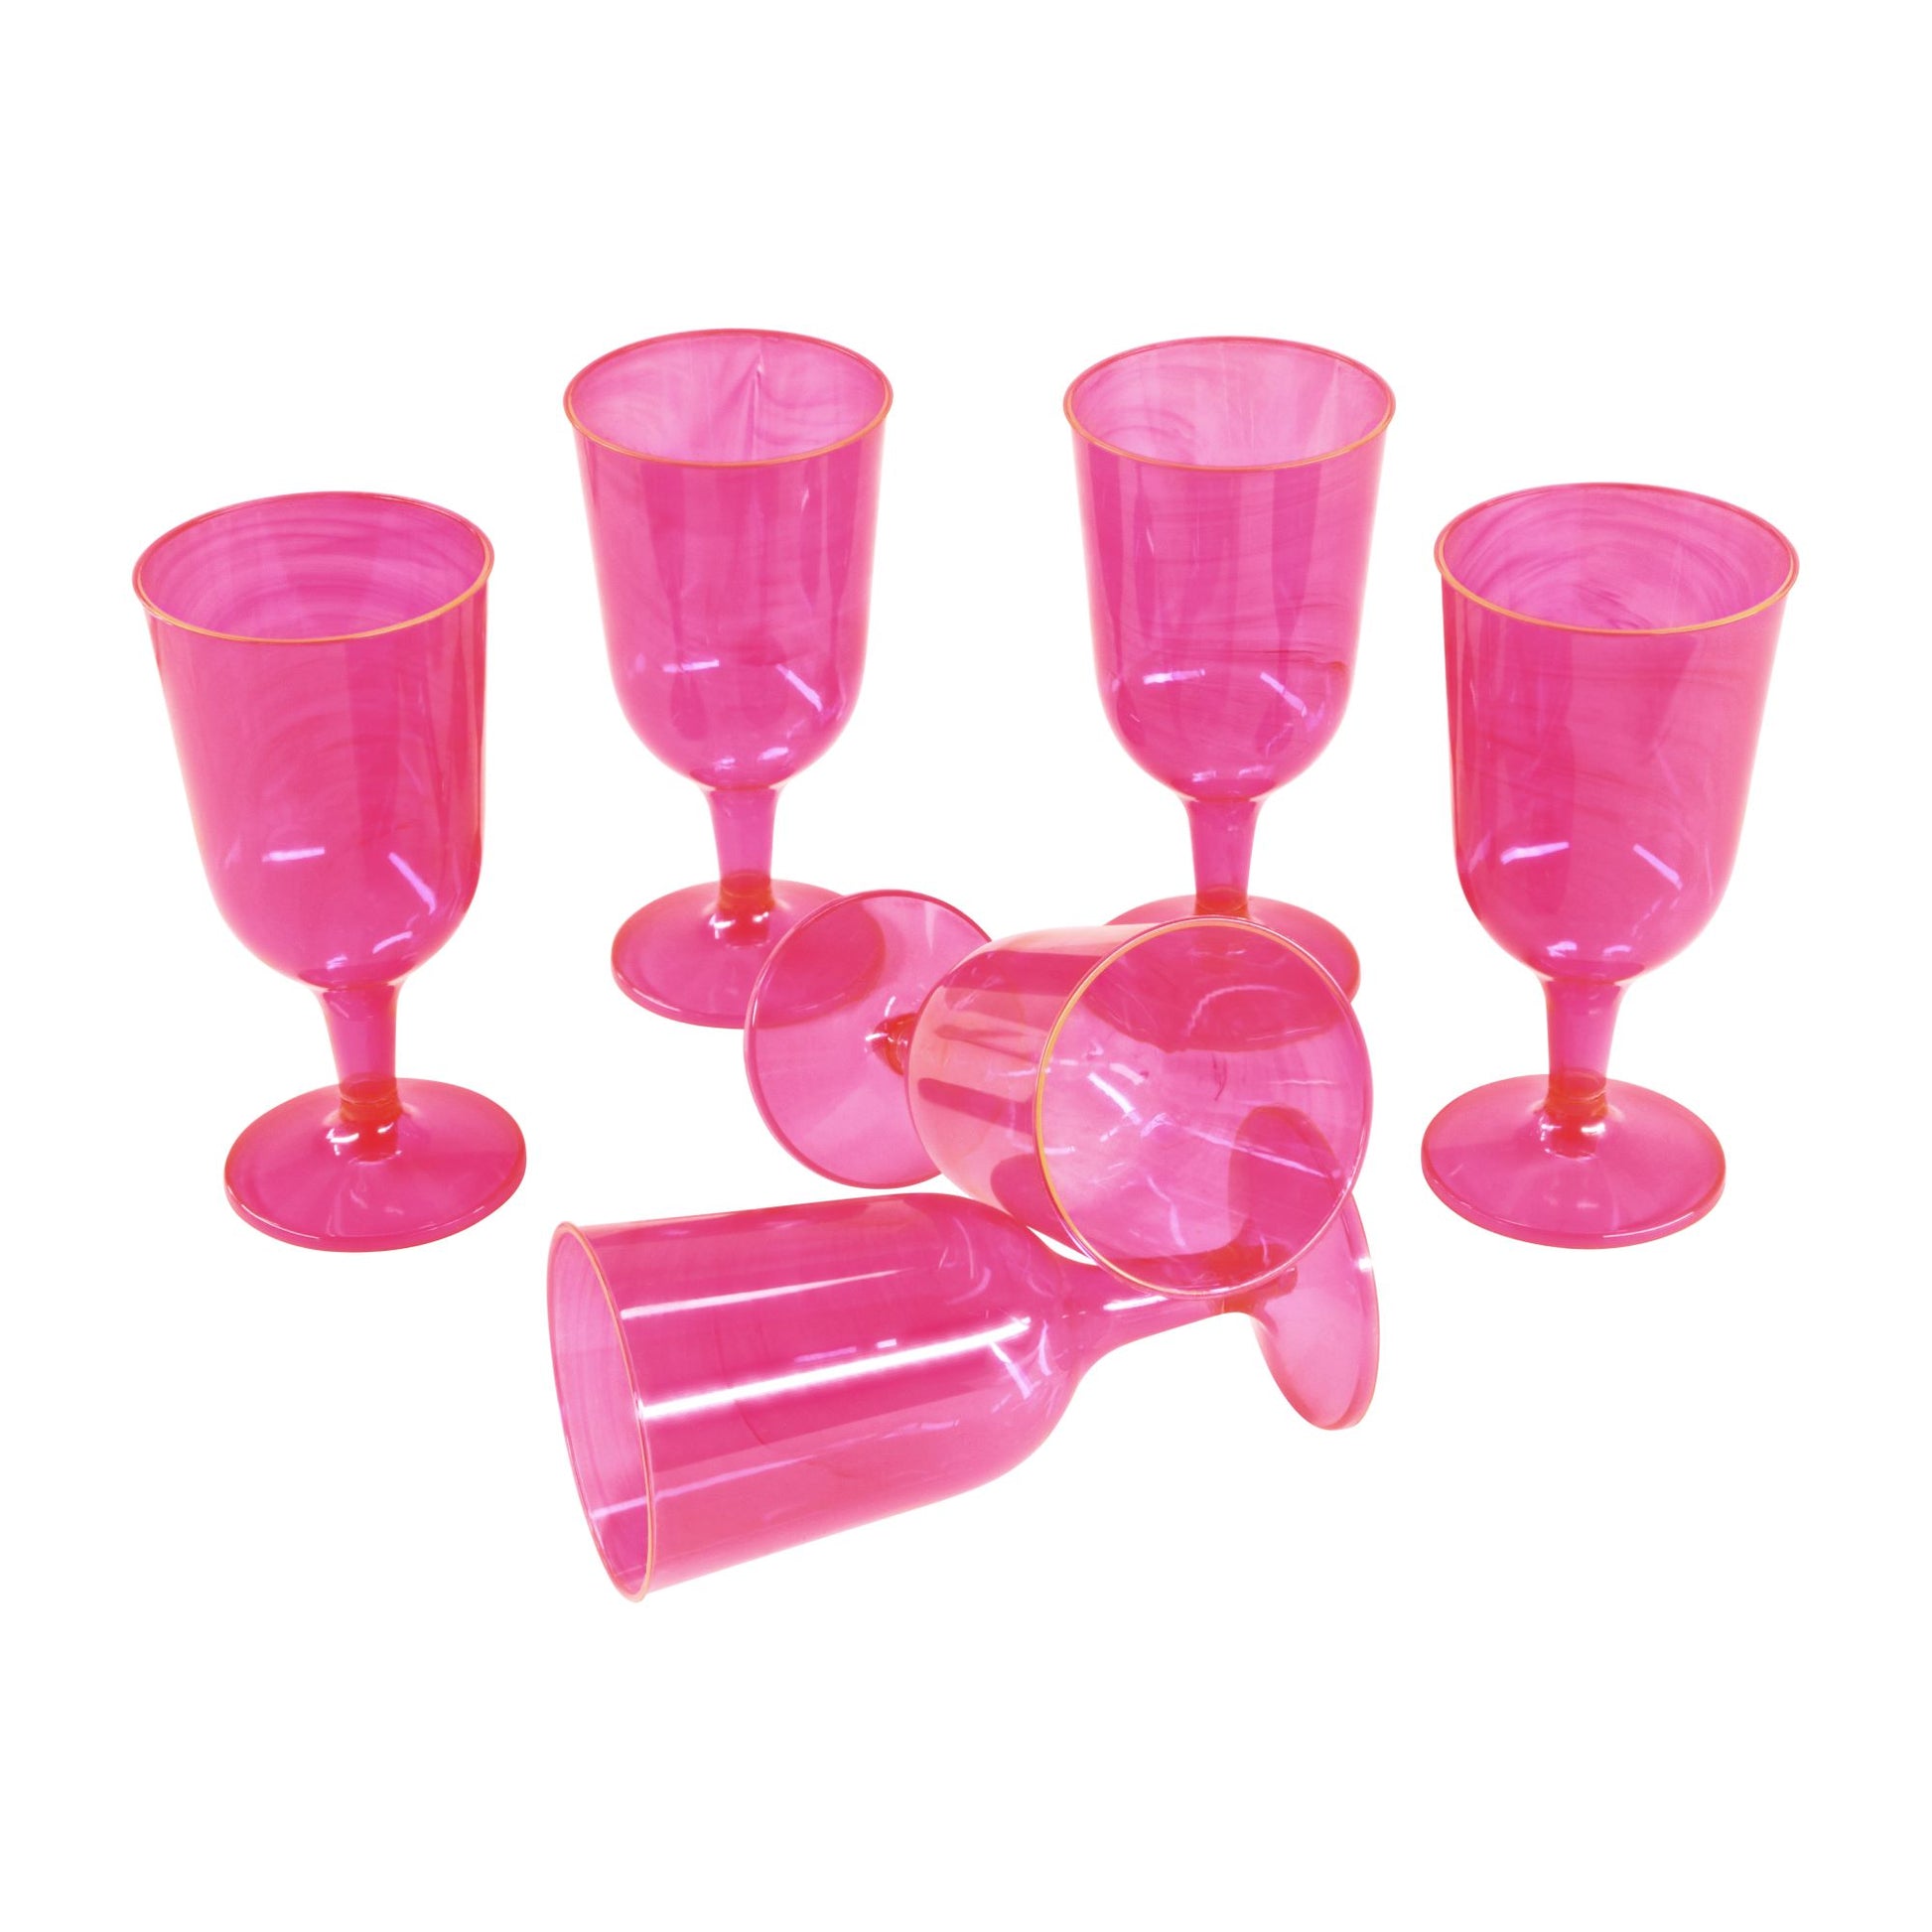 Plastic Pink Wine Glass - 2 piece - Party, BBQ, Hen Do - Disposable - Pack of 24-PCUP-WINE2PNEONx4-Product Pro-Wine Glasses